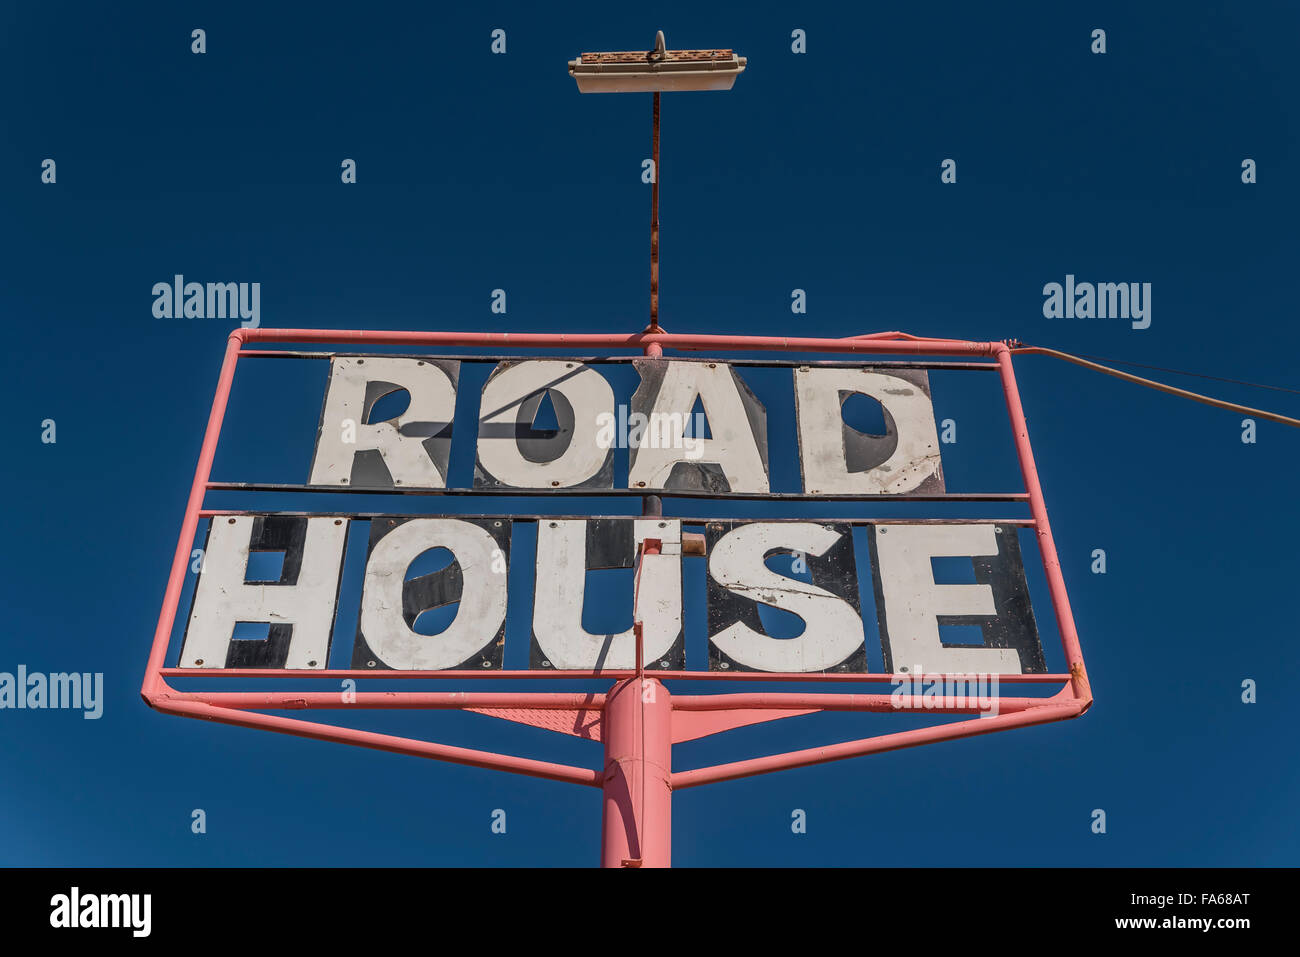 Road house sign in the Australian outback Stock Photo